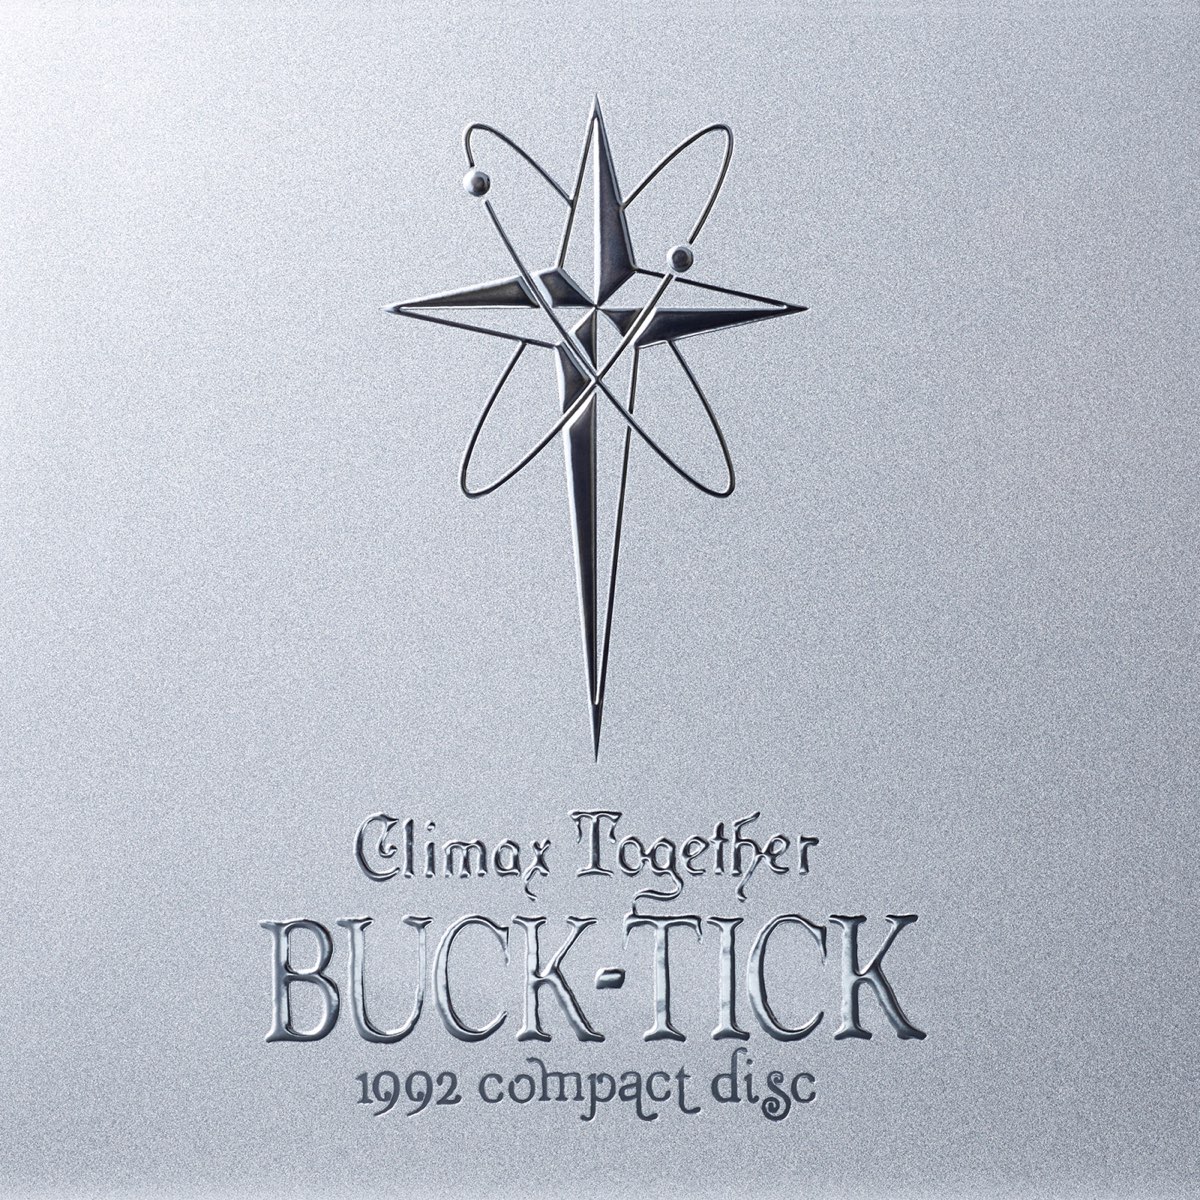 Climax Together - 1992 compact disc - - Album by BUCK-TICK - Apple